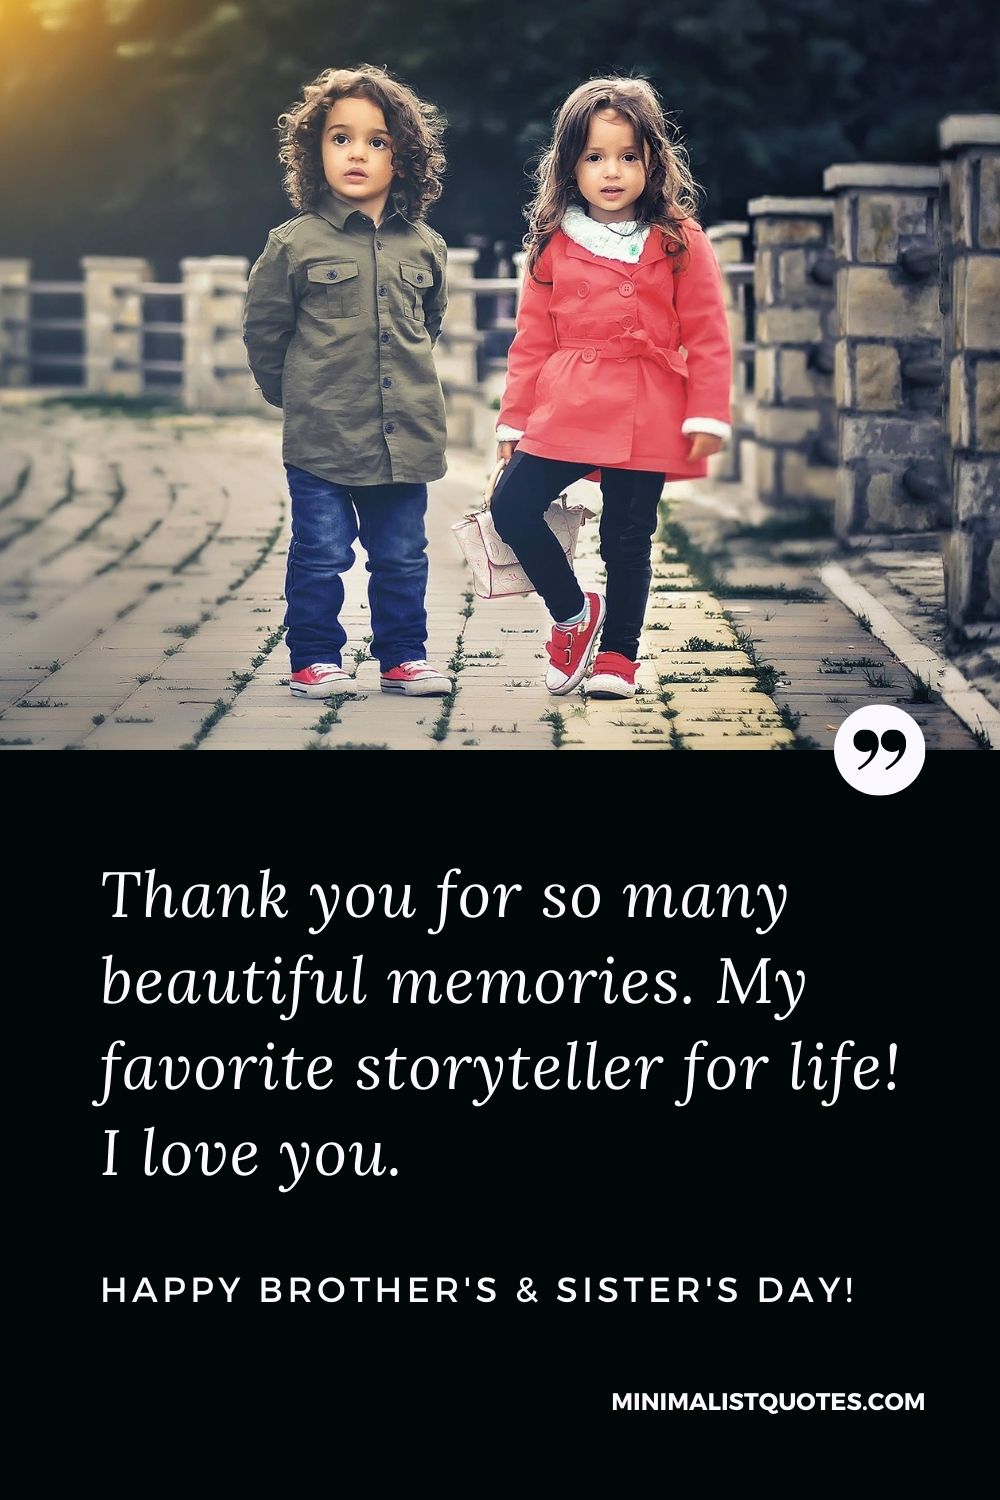 Brother's And Sister's Day Quote, Wish & Message With Image: Thank you for so many beautiful memories. My favorite storyteller for life! I love you. Happy Brother's & Sister's Day!